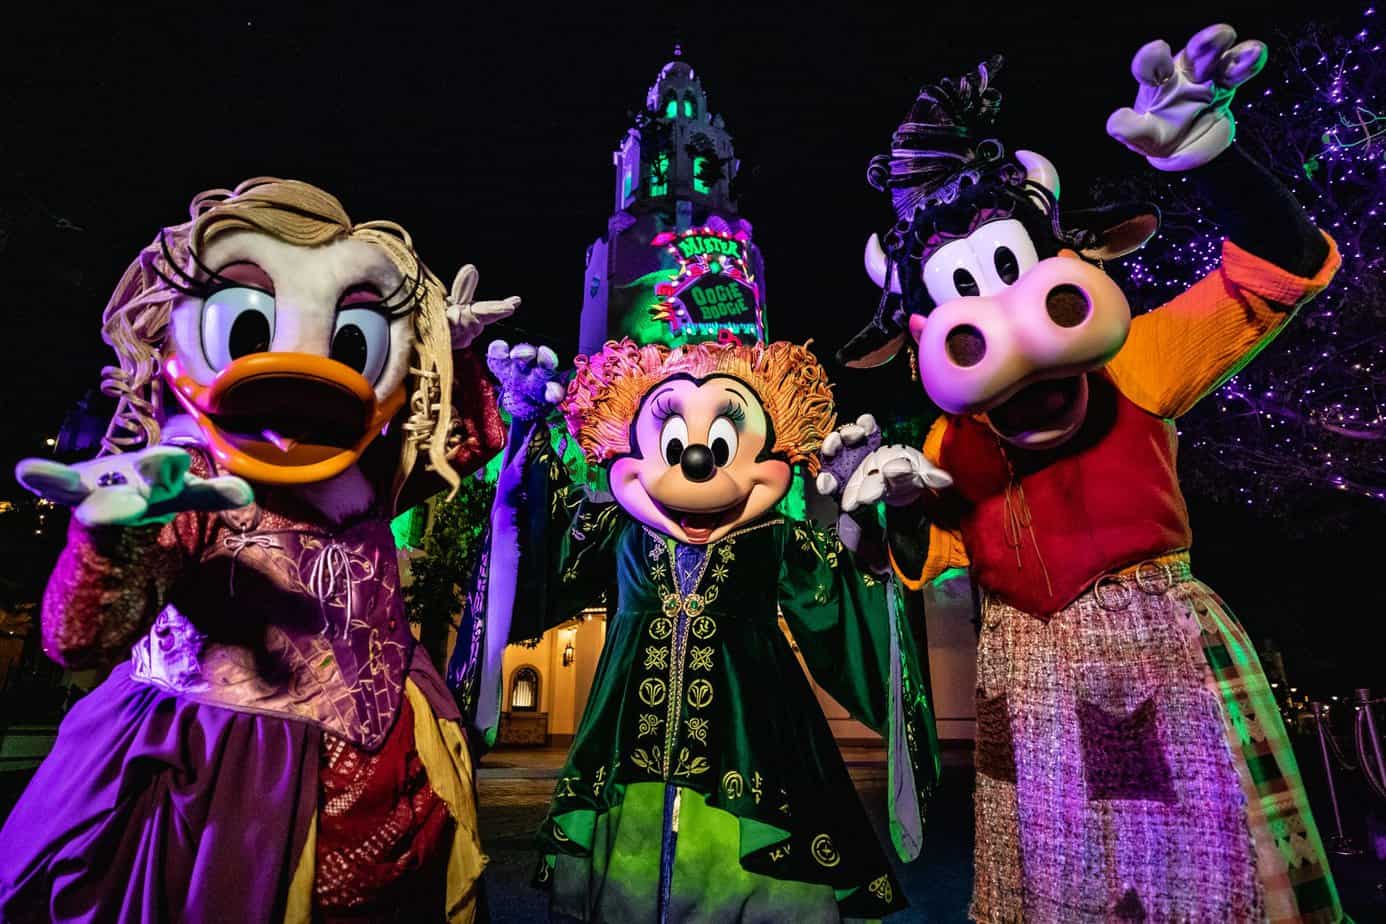 Disney Gal Pals Dress as the Sanderson Sisters at Oogie Boogie Bash in Disney California Adventure Park for Oogie Boogie Bash characters 2022